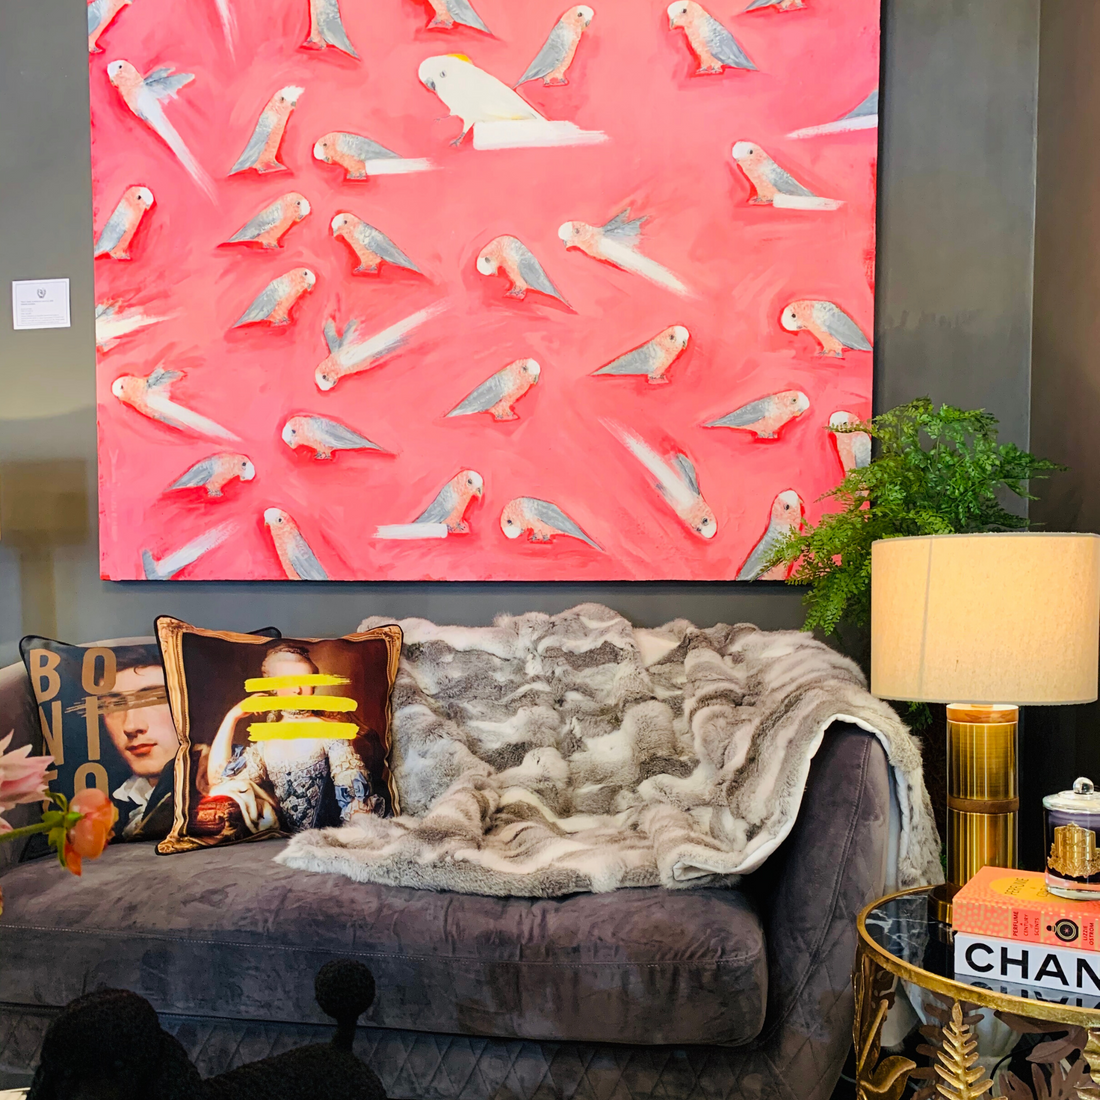 Why you need great art in your home now - Bowerbird on Argyle